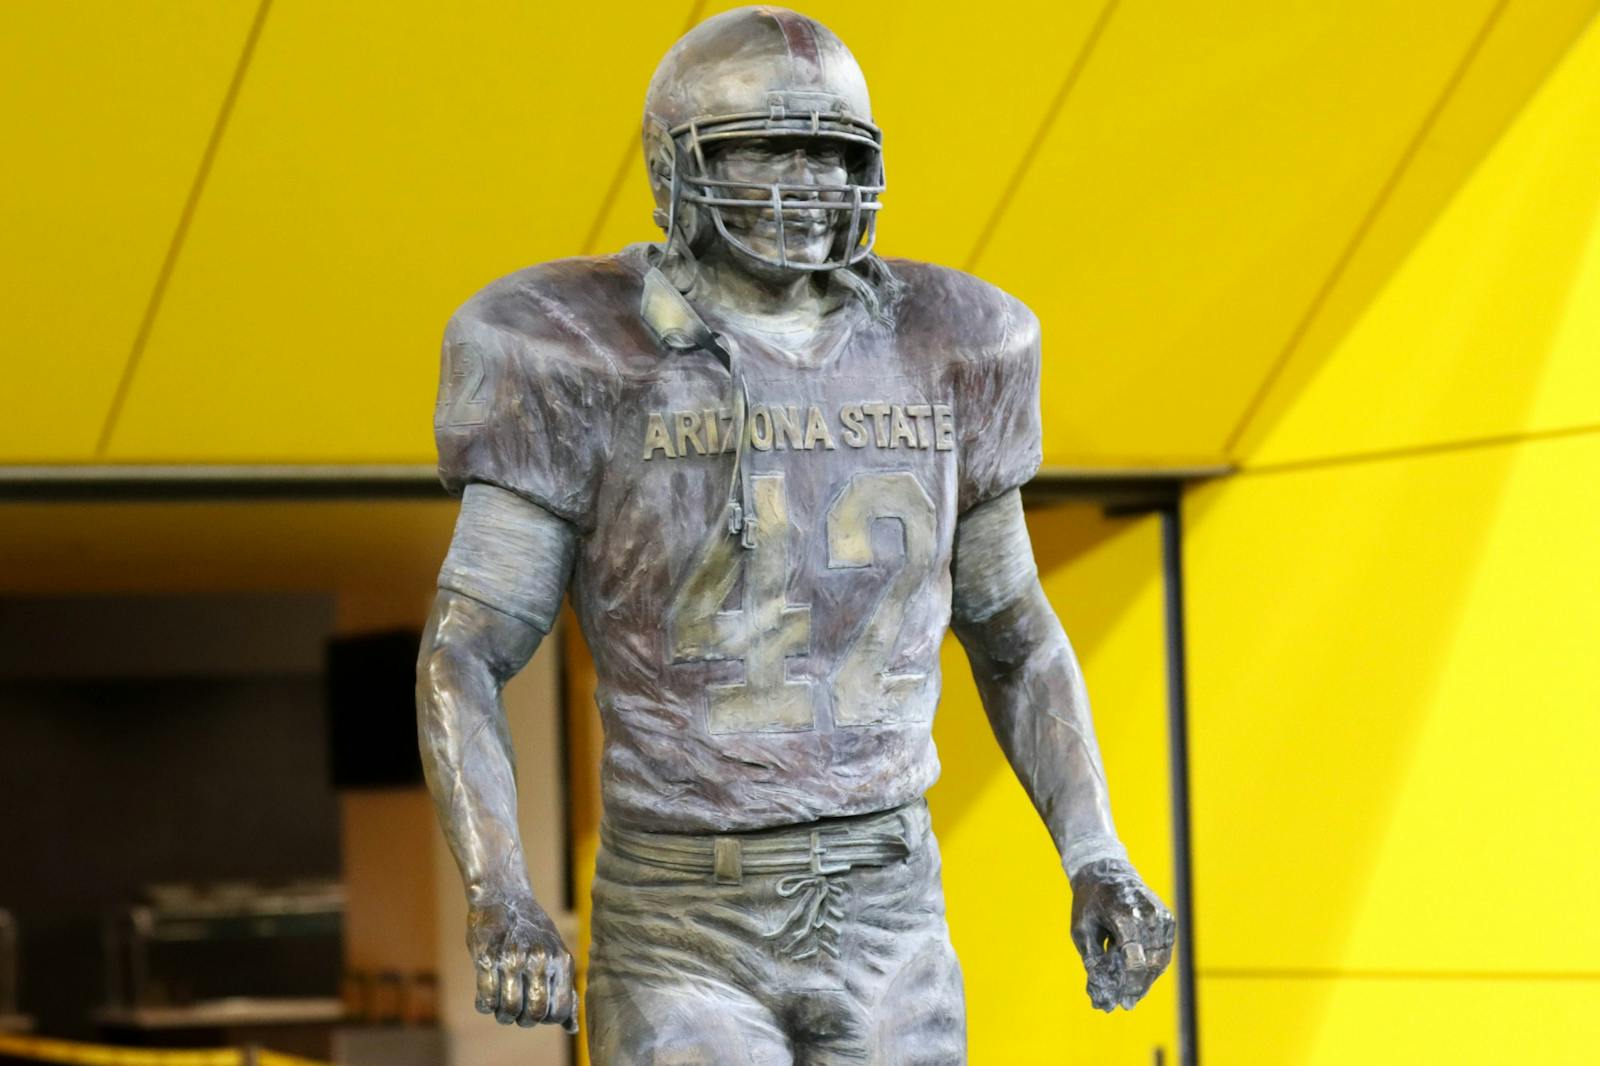 Arizona State Honors Pat Tillman and Our Nation's Veterans with